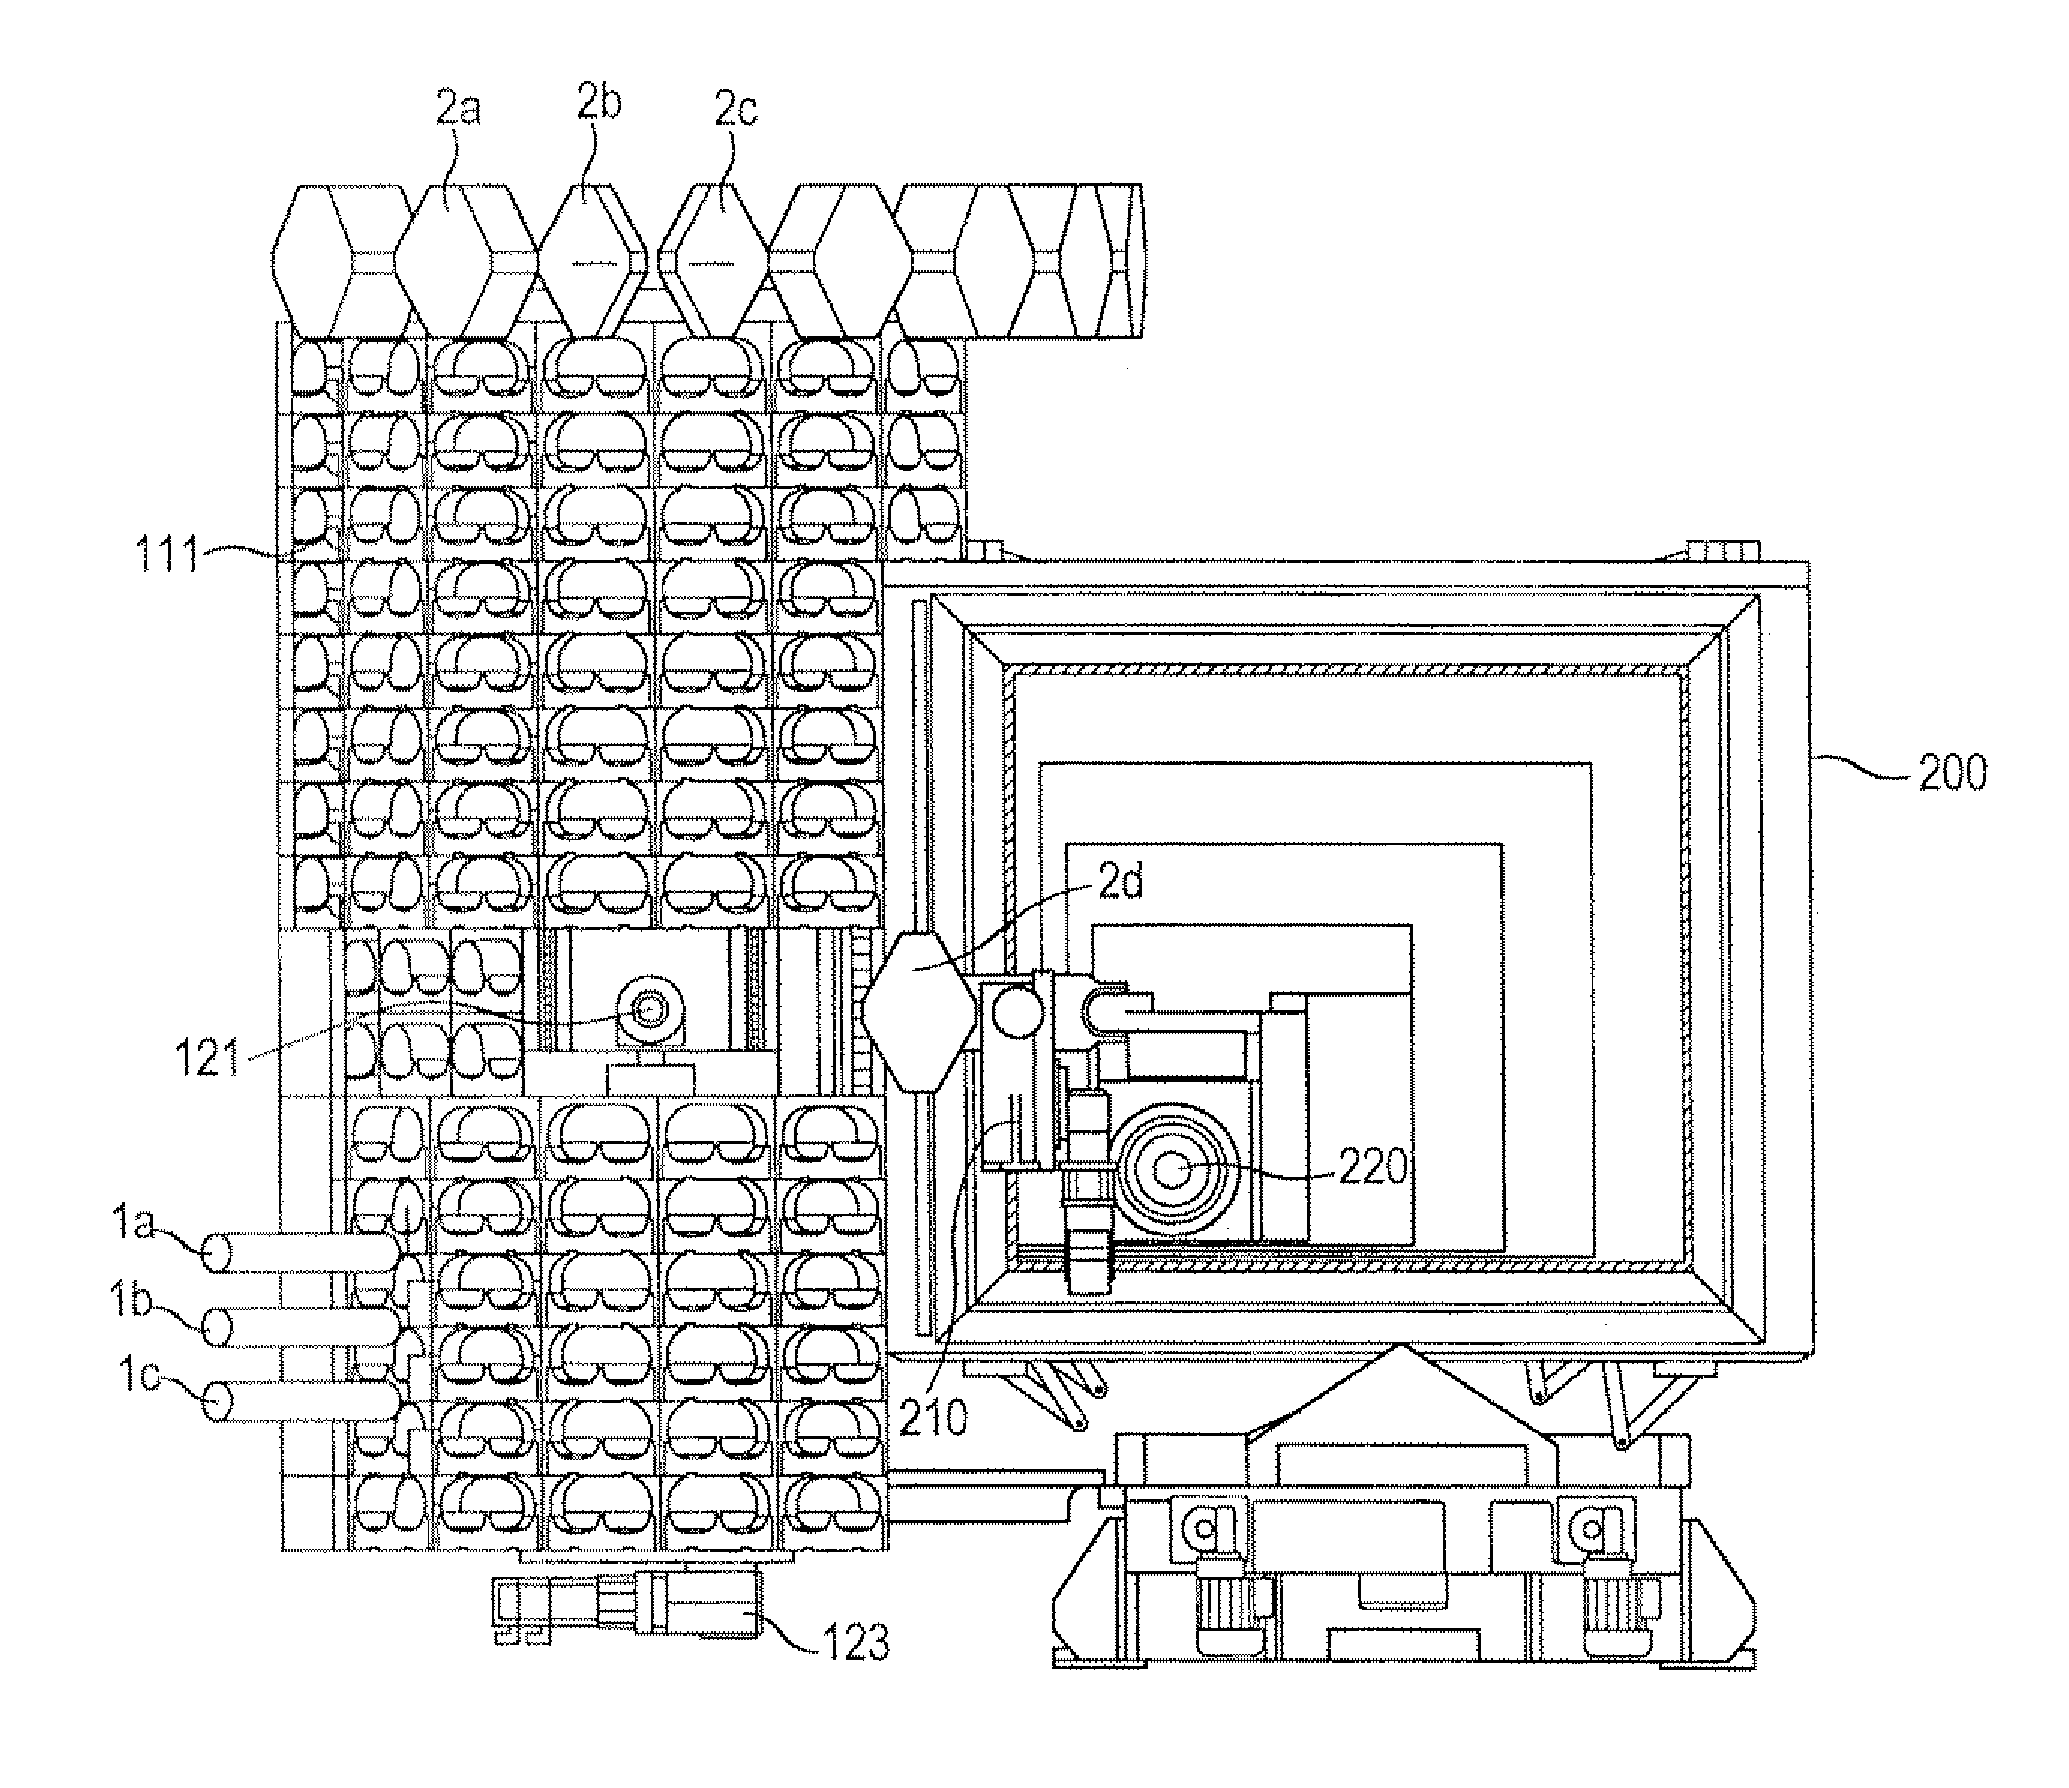 System for Changing and Inserting or Placing Tools on a Machine Tool and Tool Magazine for Storing Tools